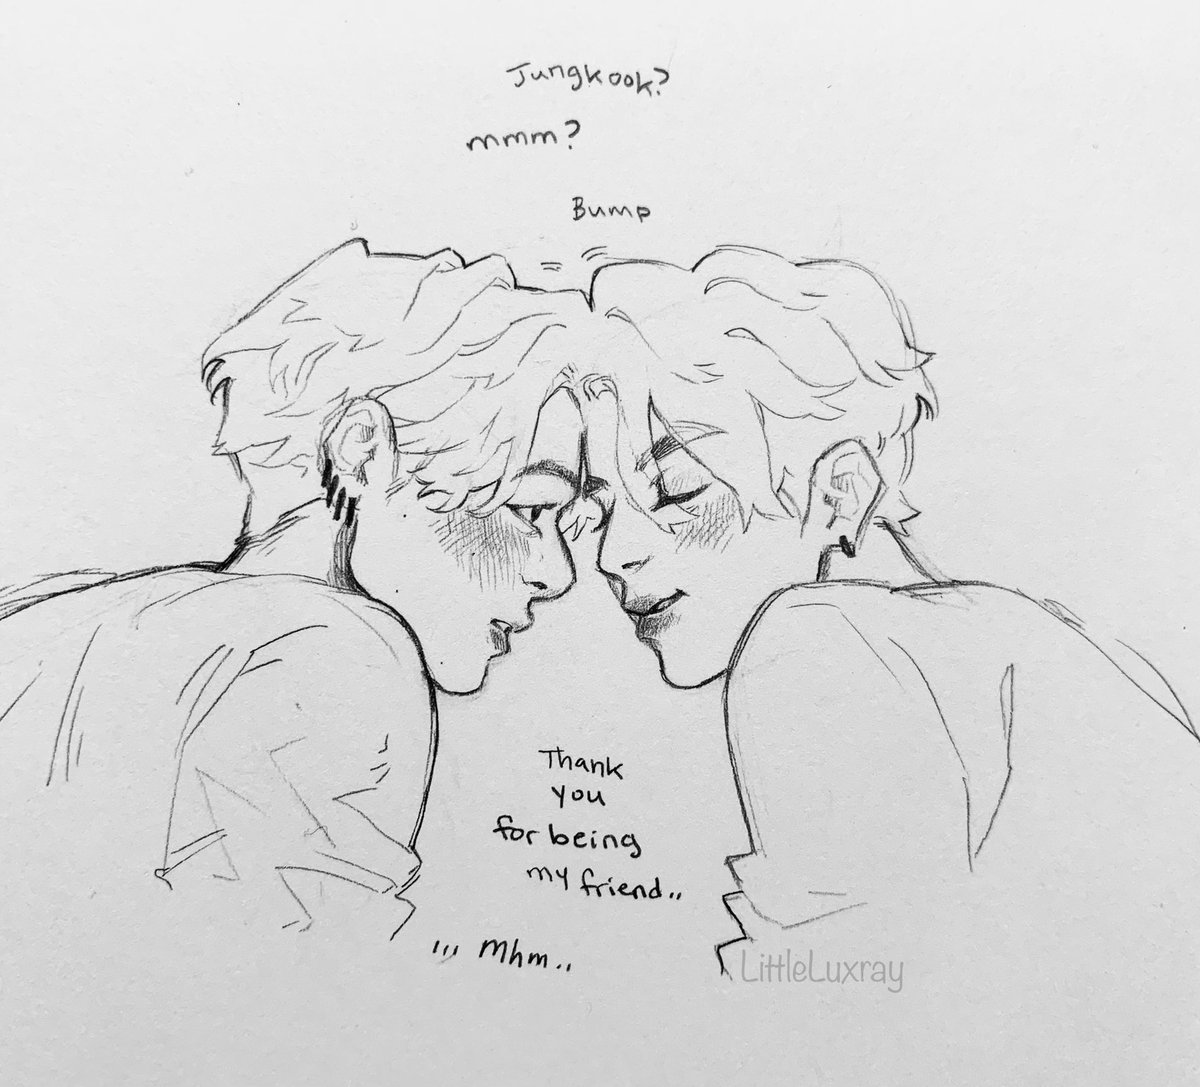 Been thinking of Jin and Jk's relationship in the AU… thought of a moment where they get kind of buzzed and Jin says some genuine things he normally wouldn't say ;; also a Jin doodle 🕸 